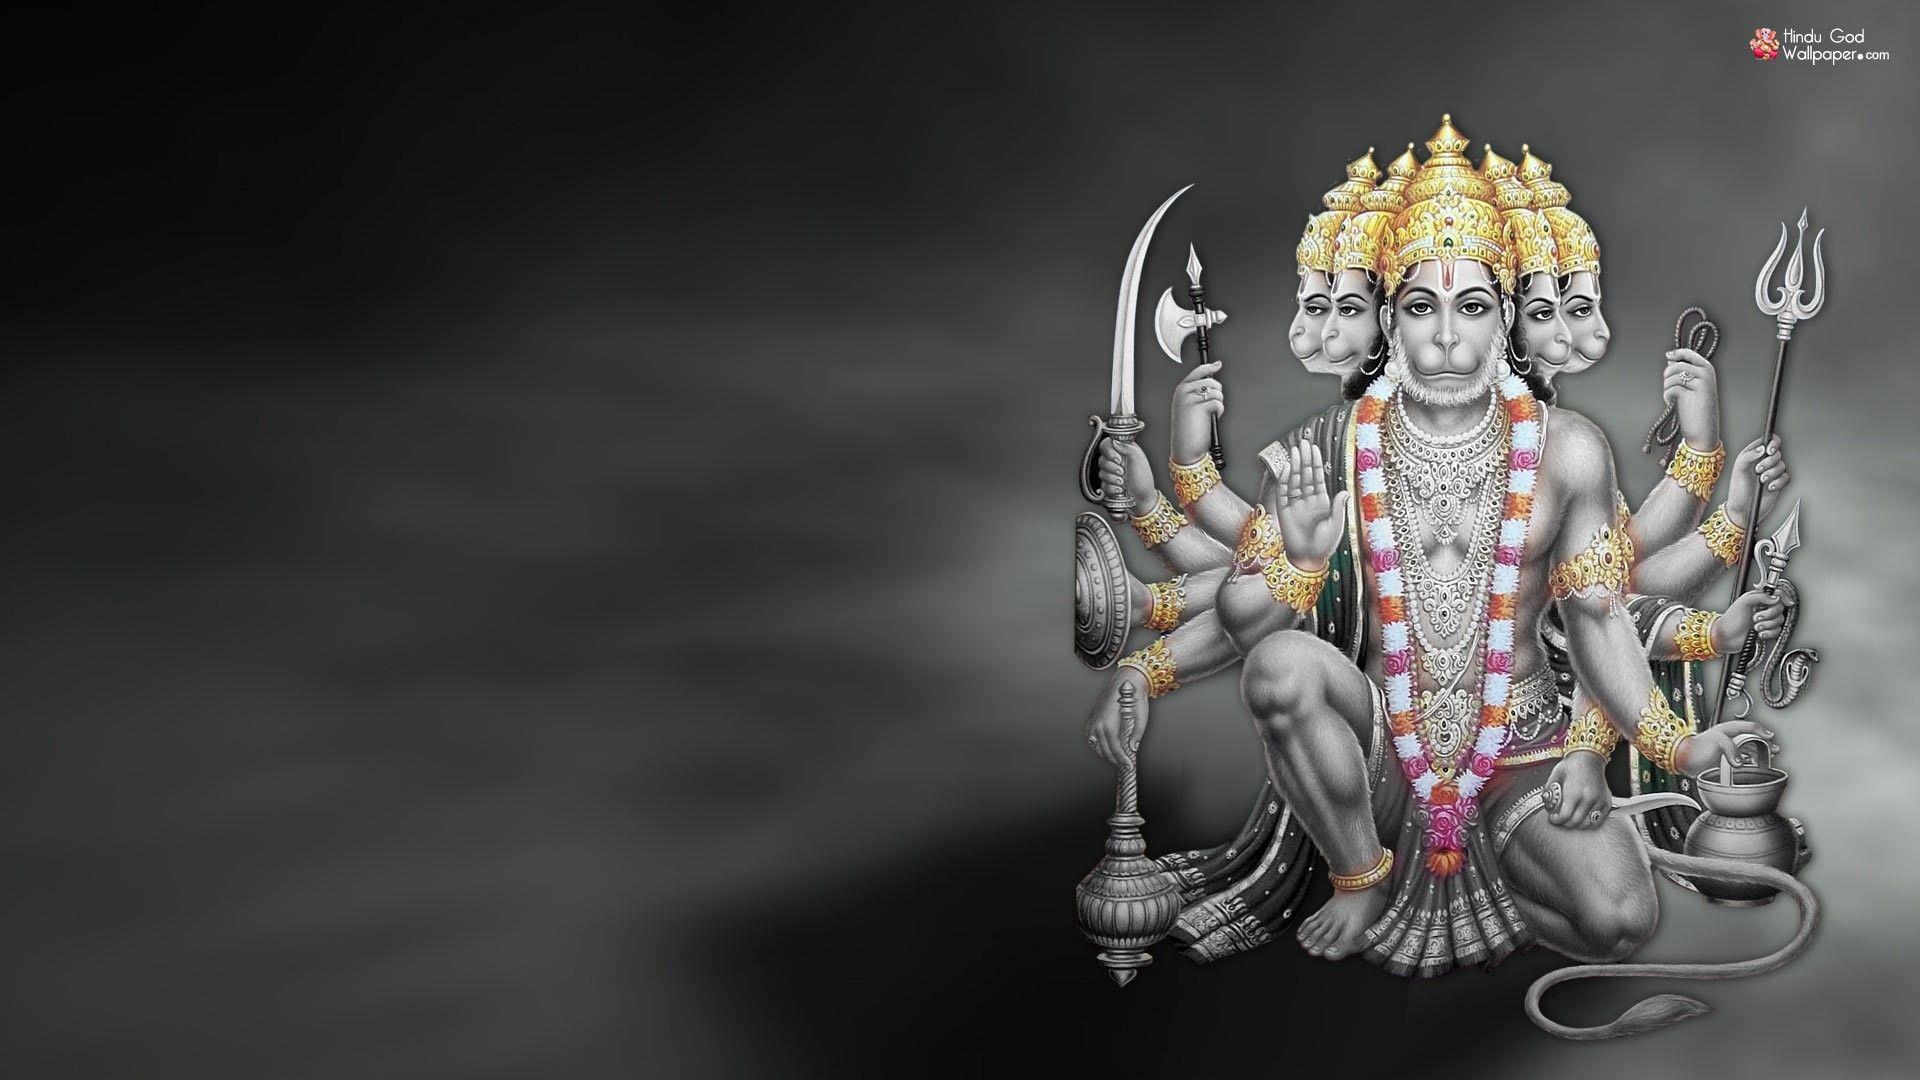 An Incredible Collection of Full 4K HD God Image Wallpapers - Over 999  Choices!